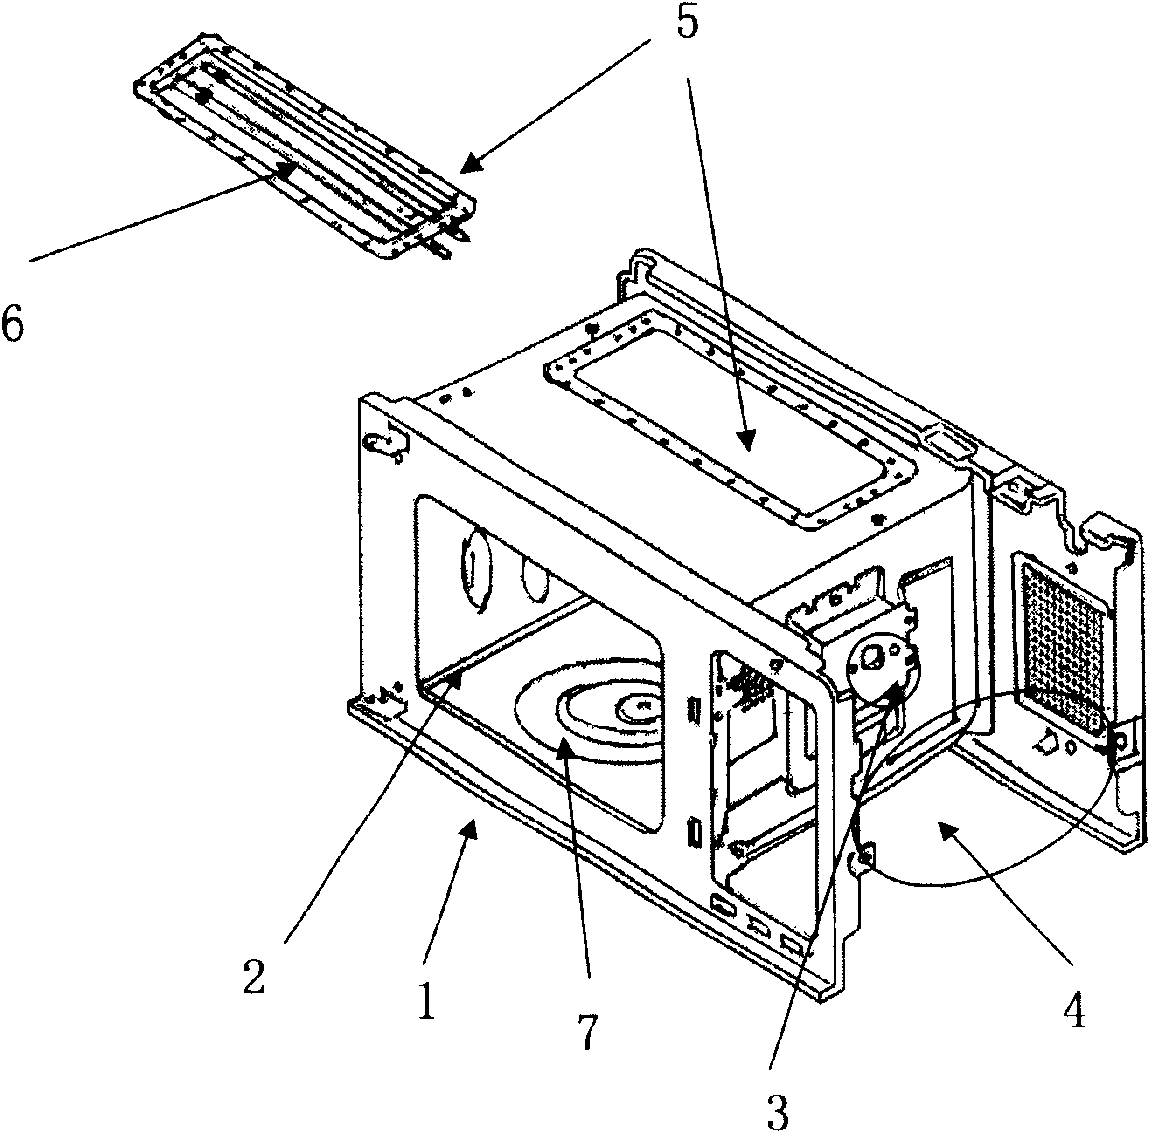 Grilling pipe and microwave oven utilizing same